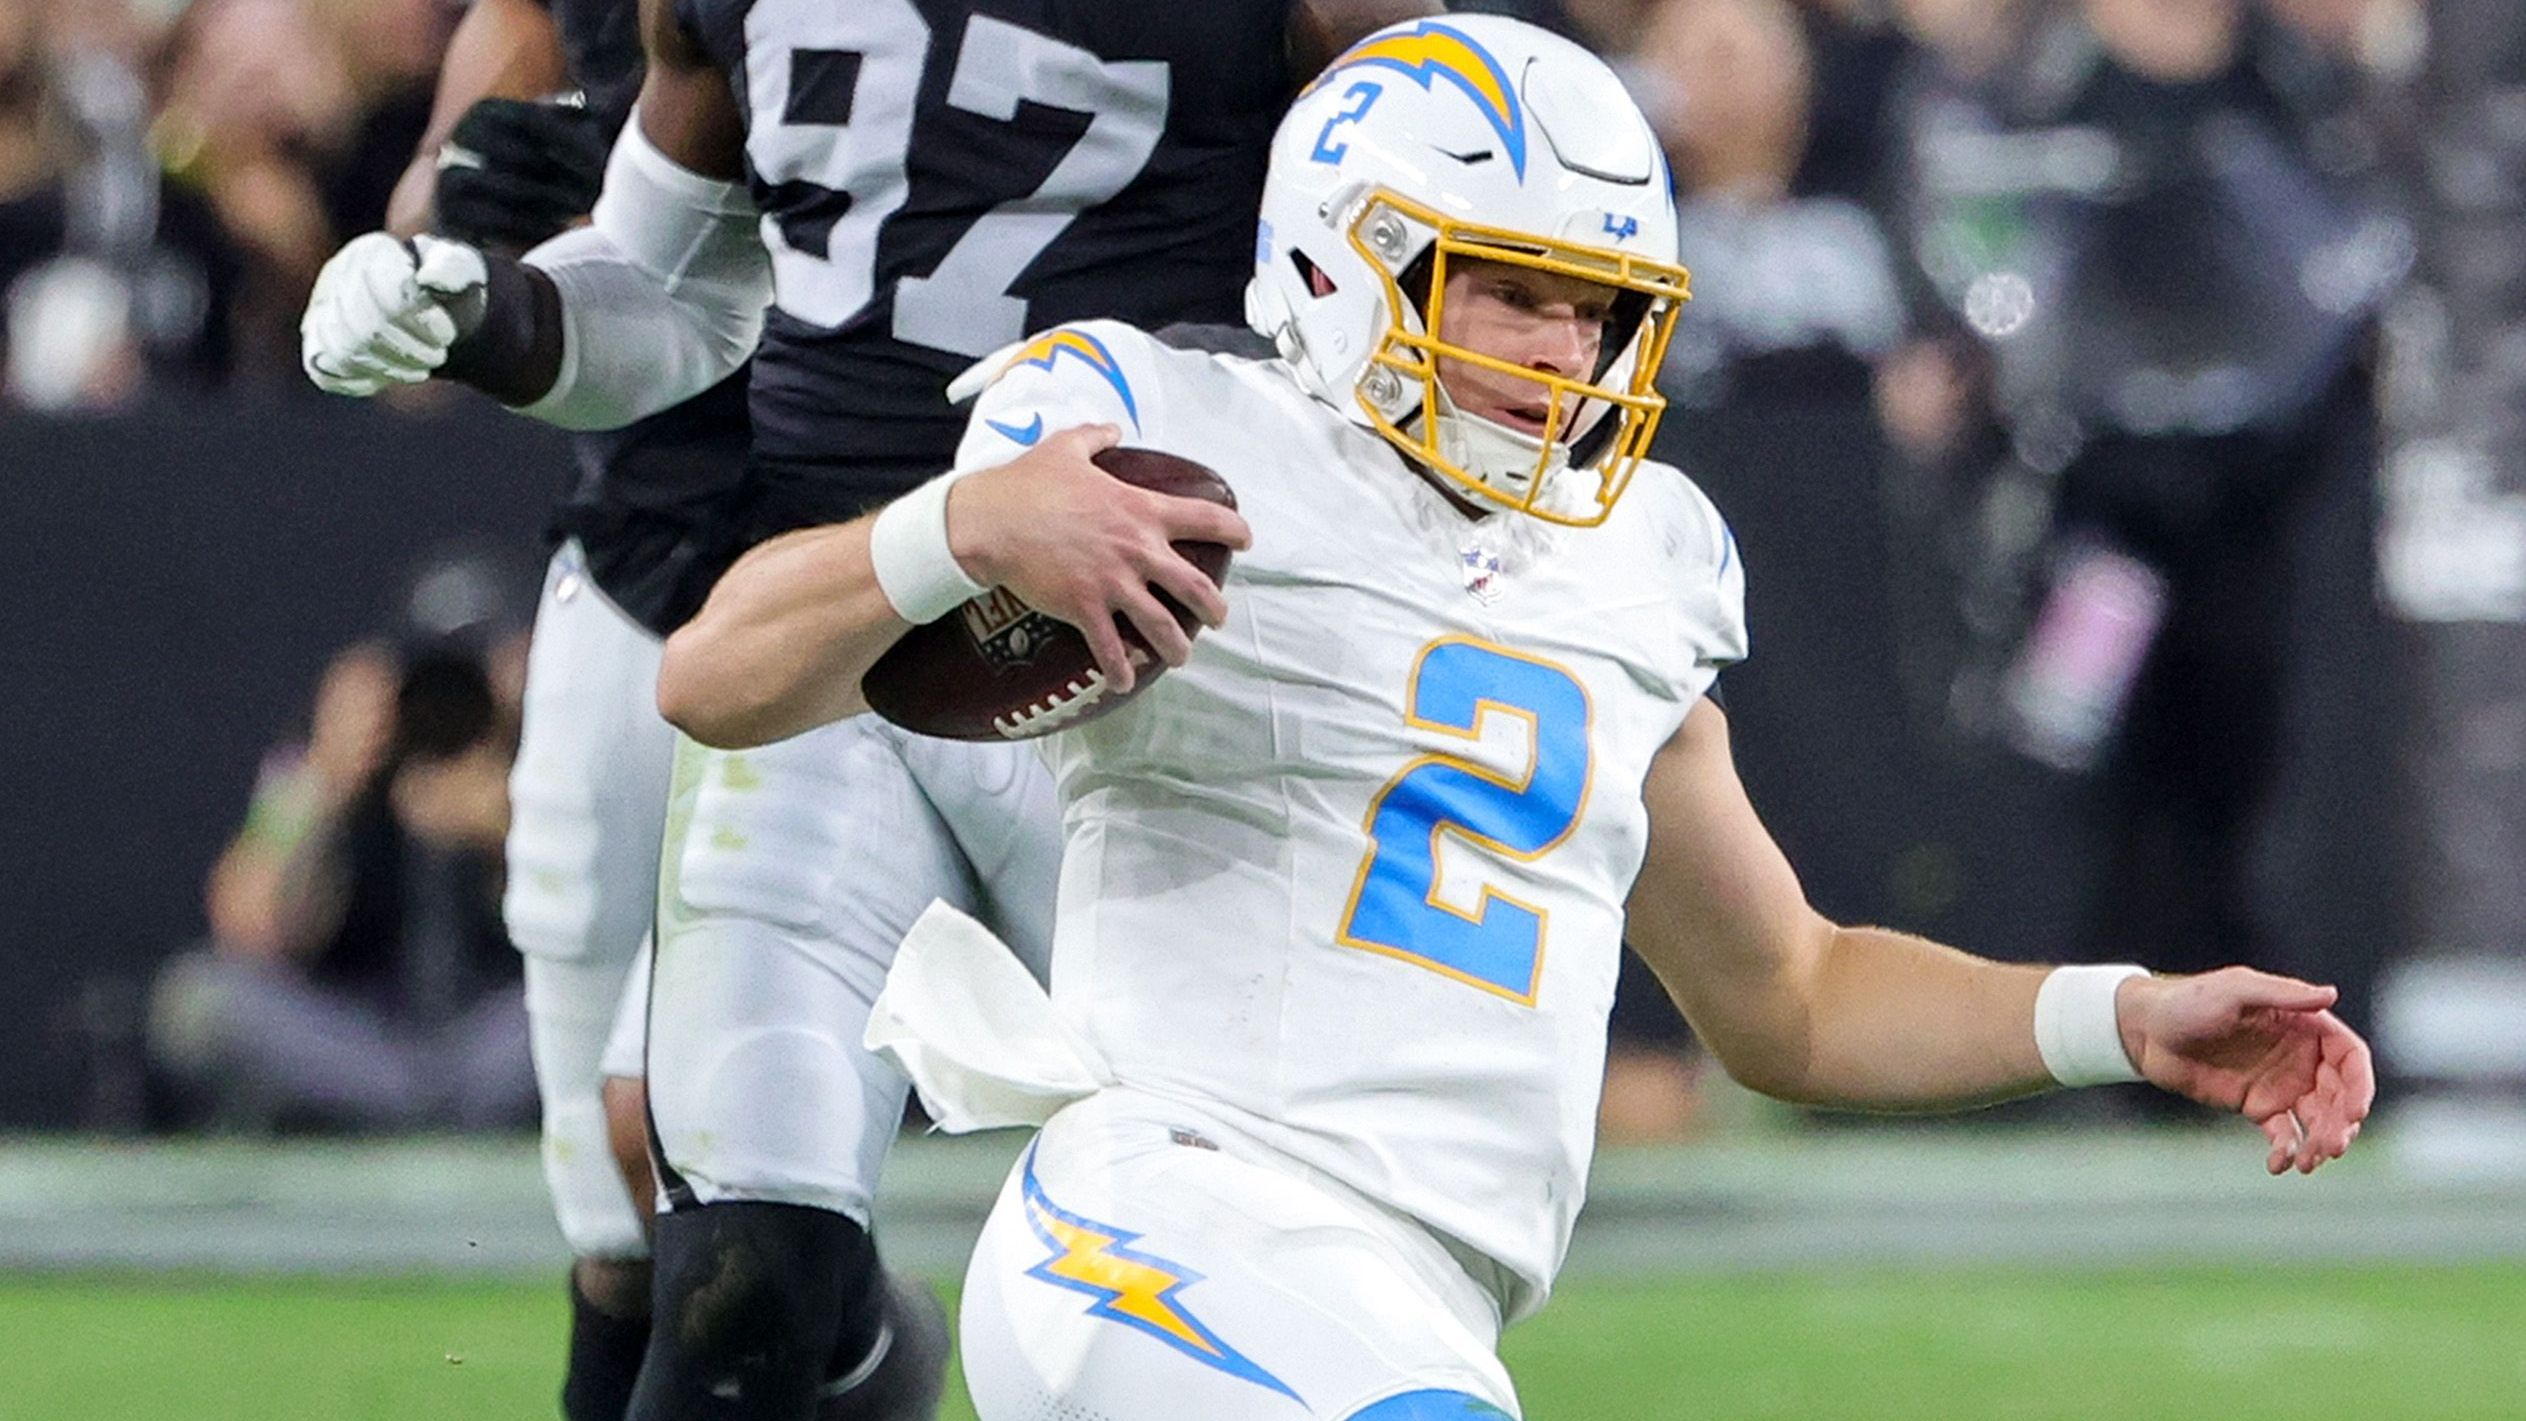 <strong>27. Los Angeles Chargers</strong><br>Zeit: 28:55 Minuten<br>Possession Percentage: 48 Prozent